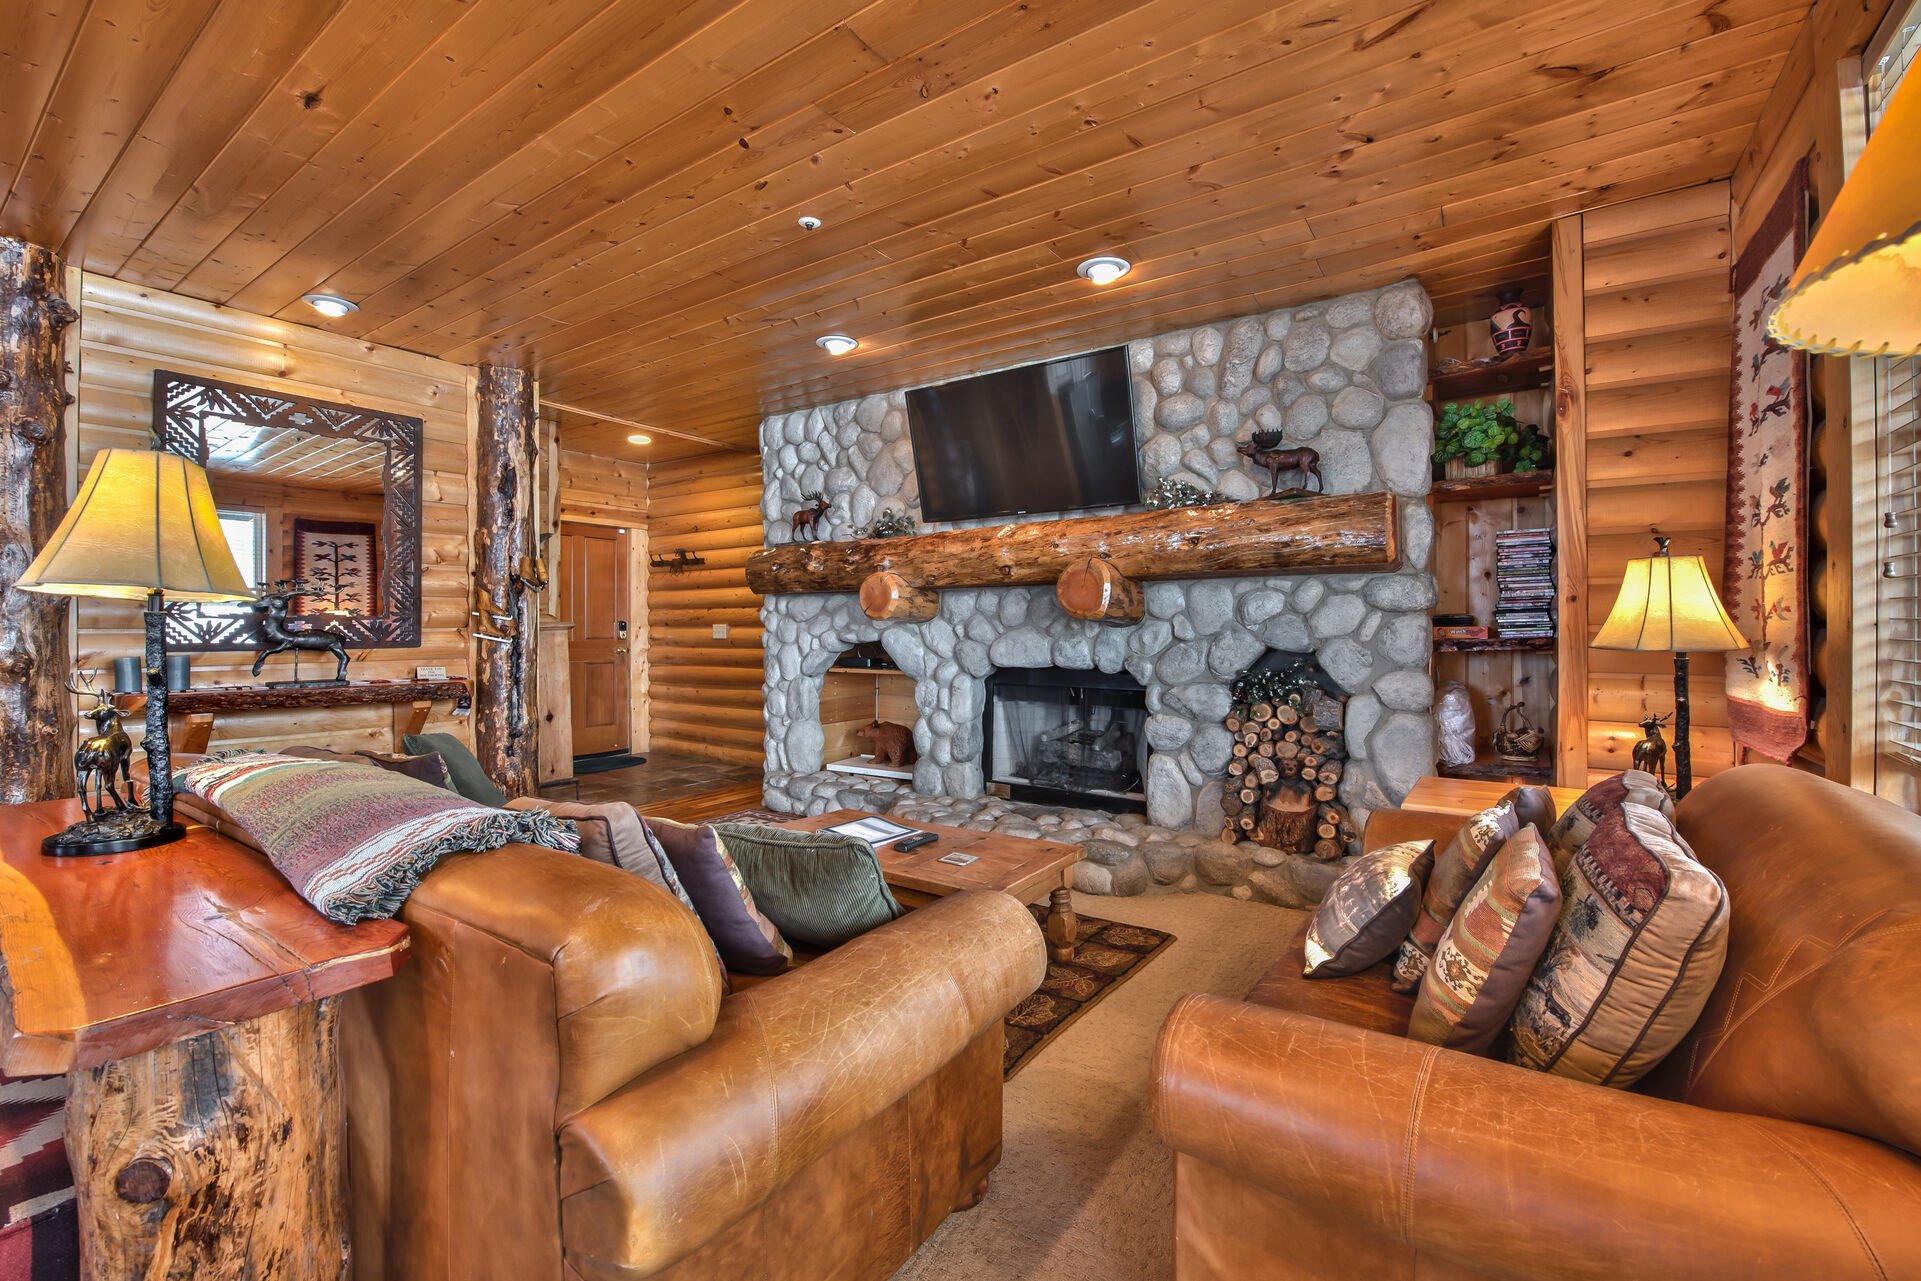 Living Room with Comfortable Mountain Furnishings, a Queen Sleeper Sofa, Stone Fireplace, Flat Screen TV and Mountain Views